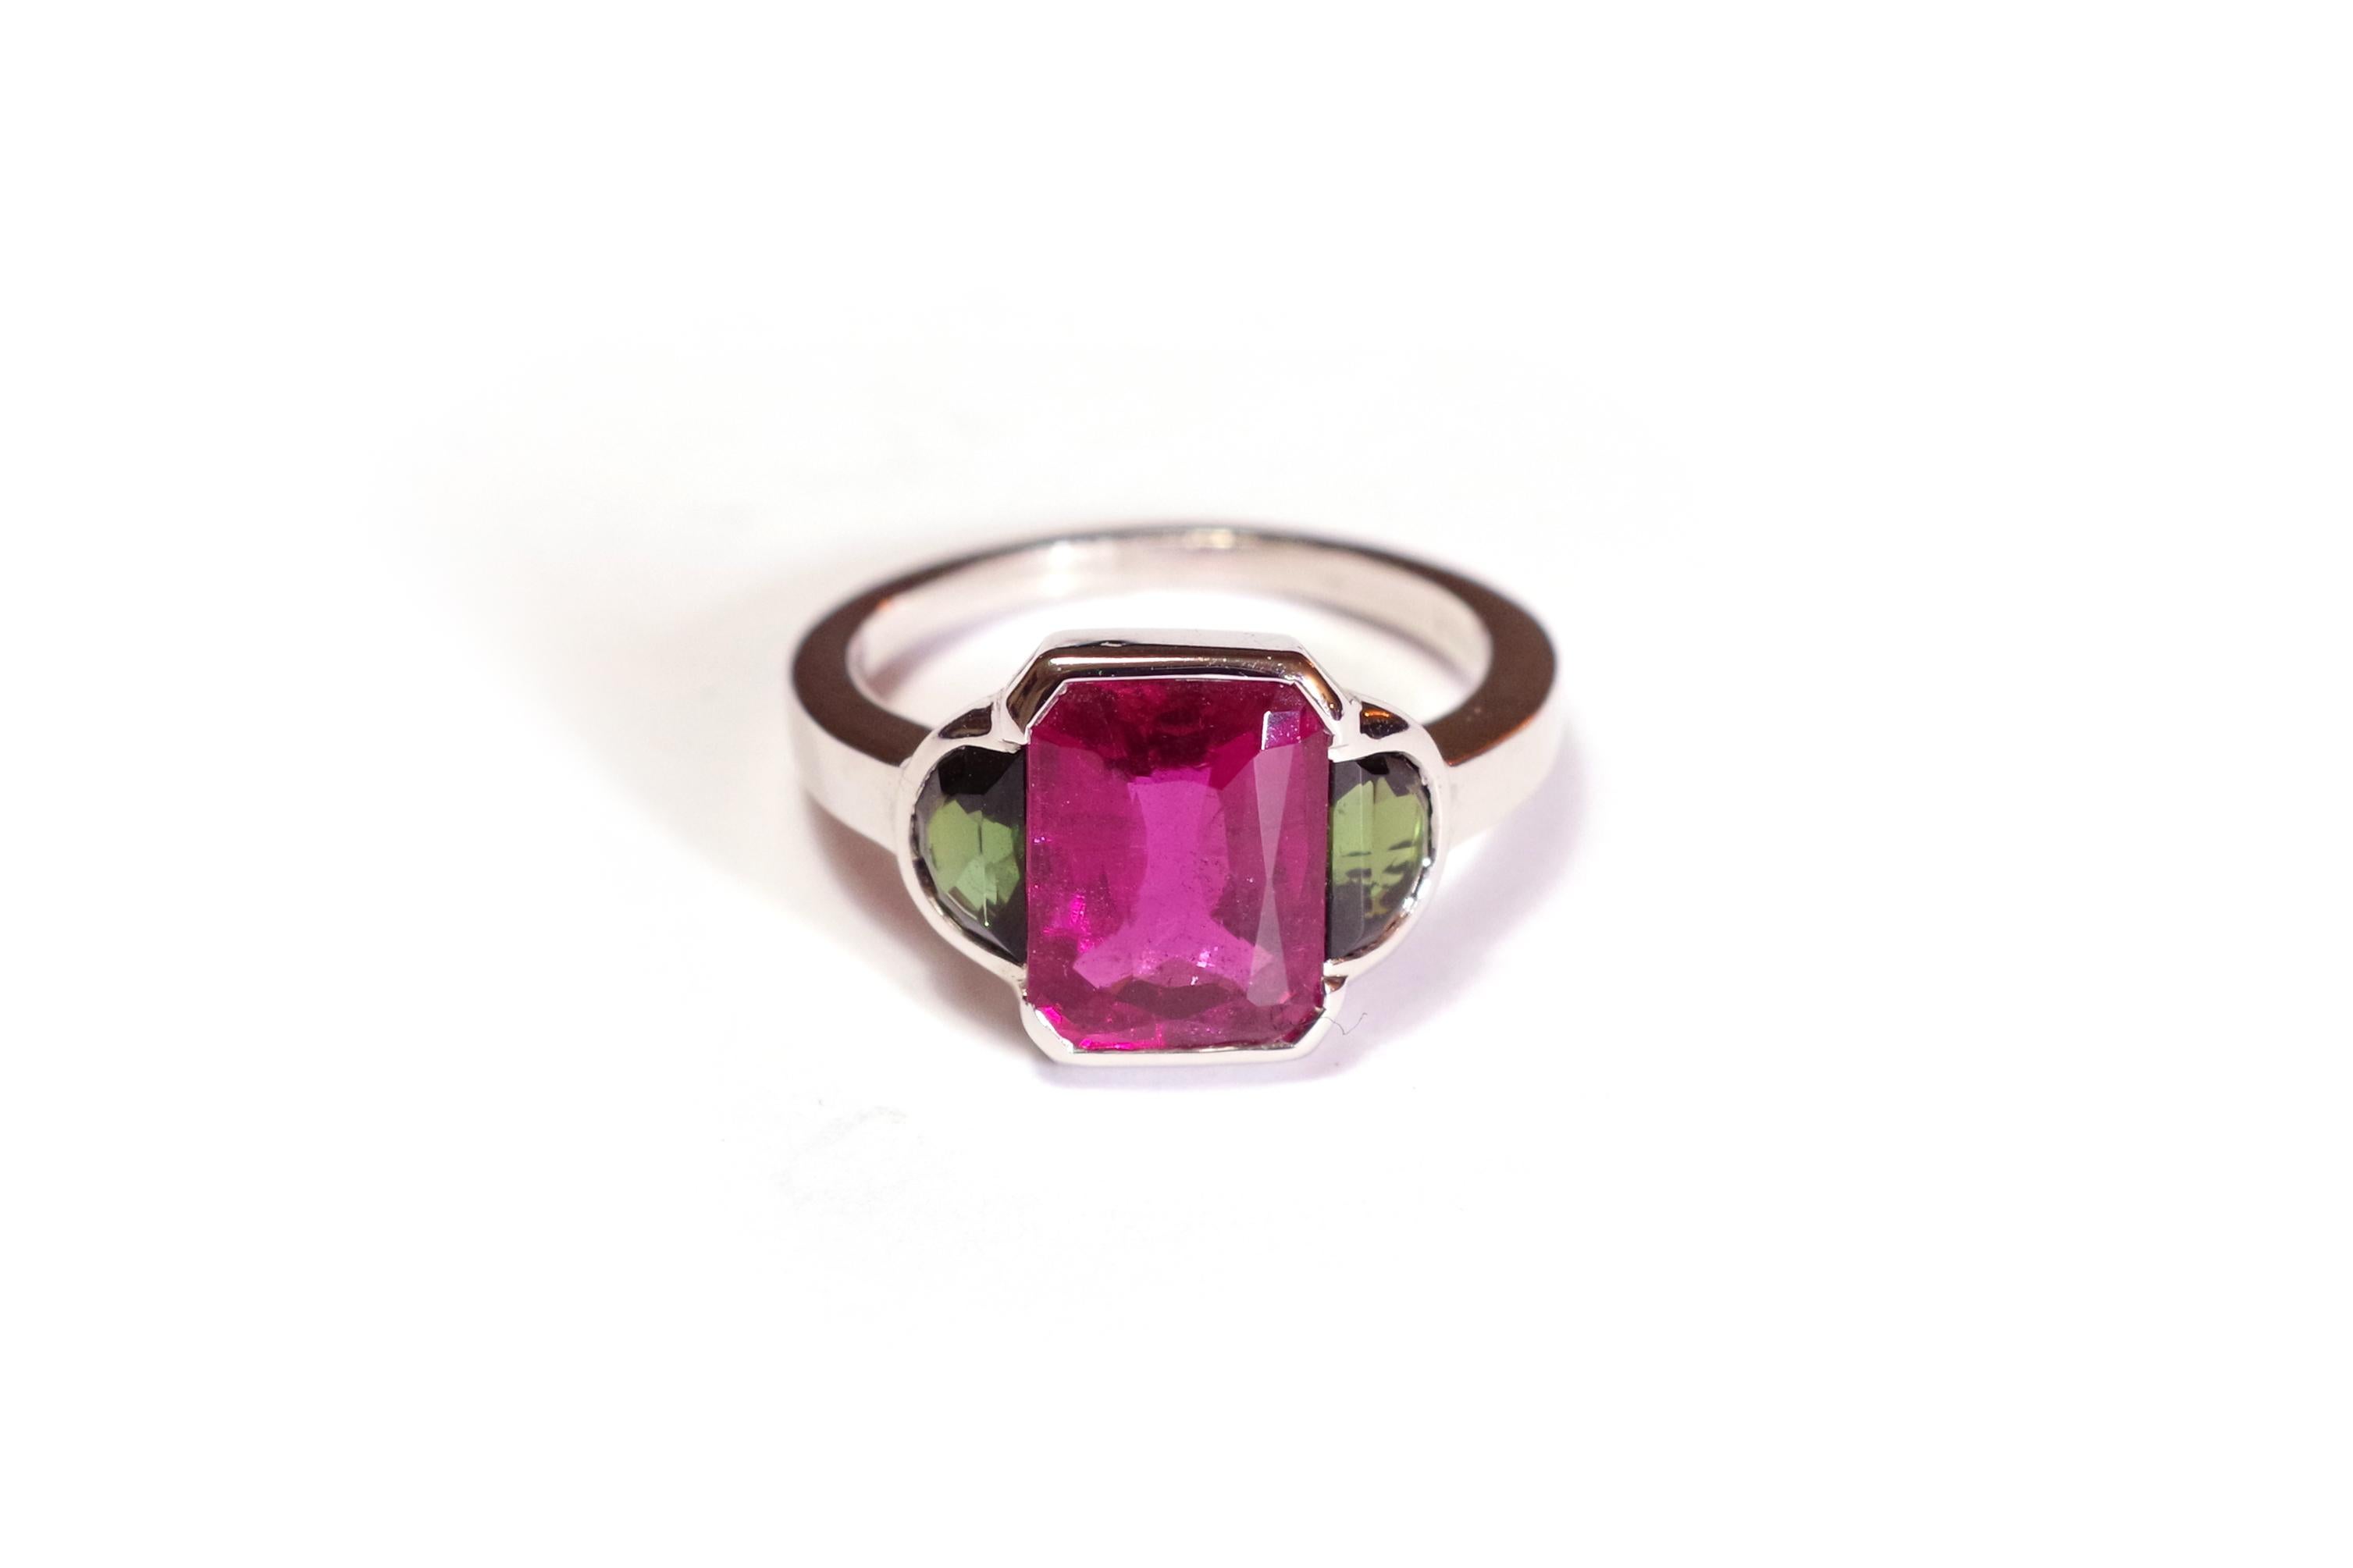 Trilogy tourmaline ring in white gold 18 karats. Ring centred with an important pink tourmaline, also called rubellite, rectangular fancy cut. The rubellite has a beautiful raspberry-pink colour with a dark red undertone. The gem is framed by two